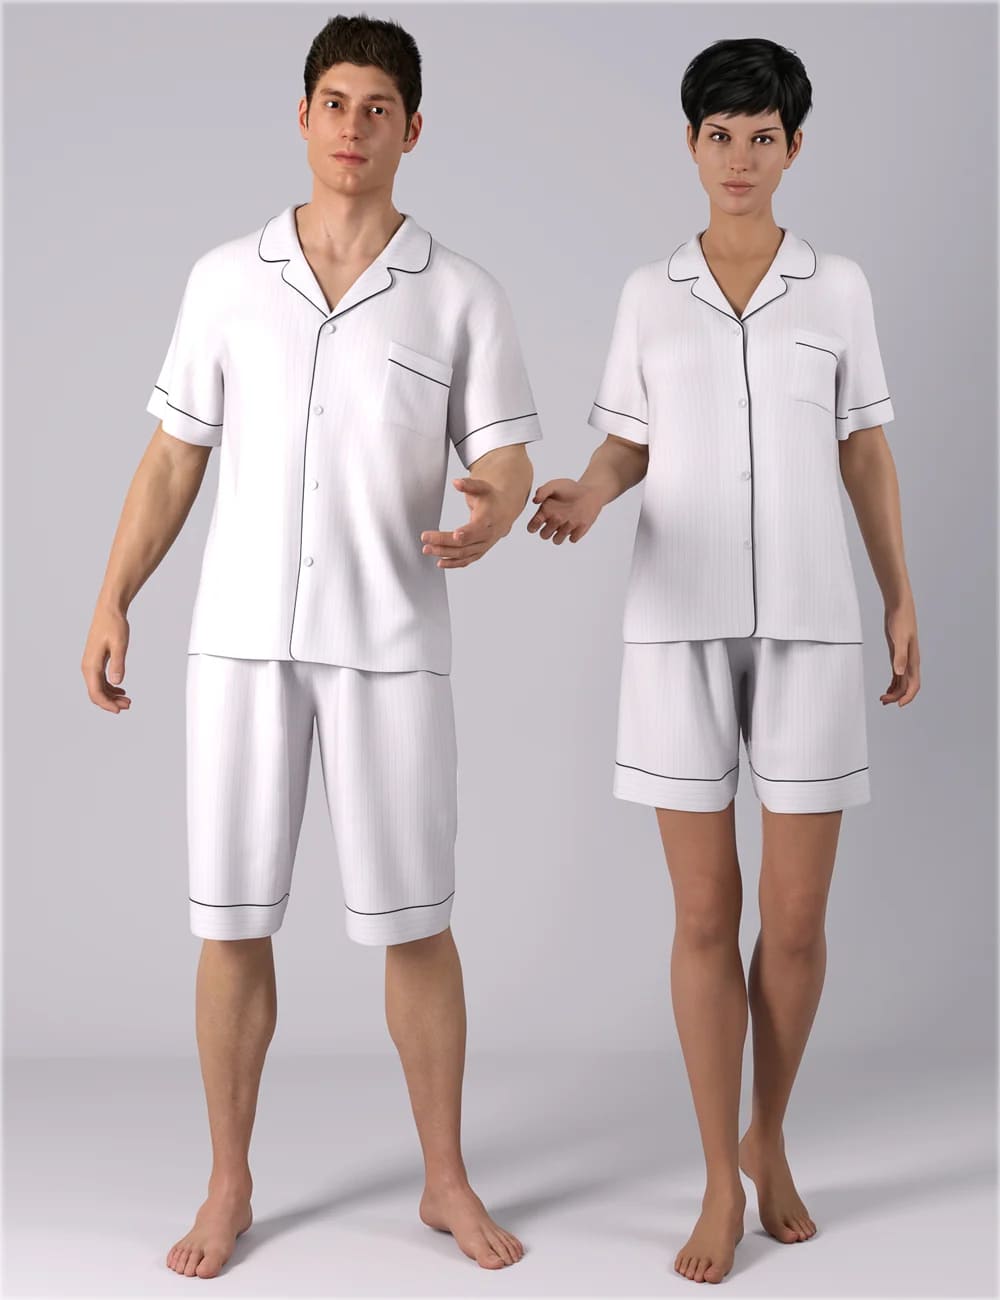 dForce HnC Summer Pajamas Outfits for Genesis 8.1 Females and Males_DAZ3DDL